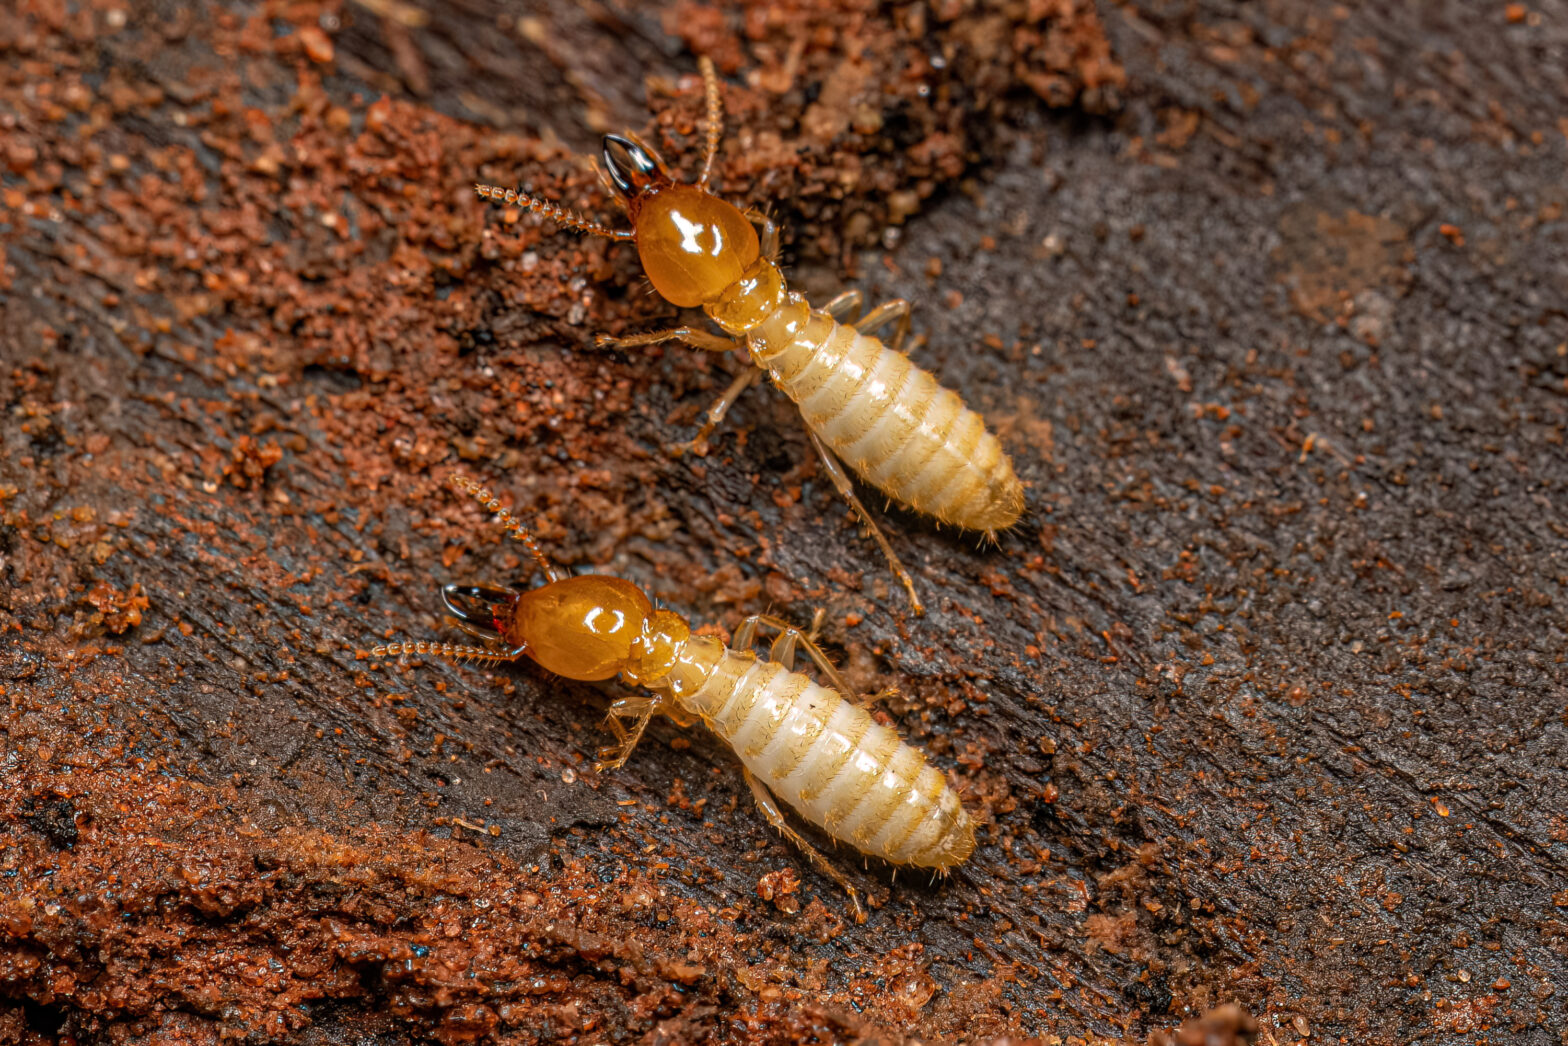 Small Typical Termite Insect crawling on the ground looking for wood.